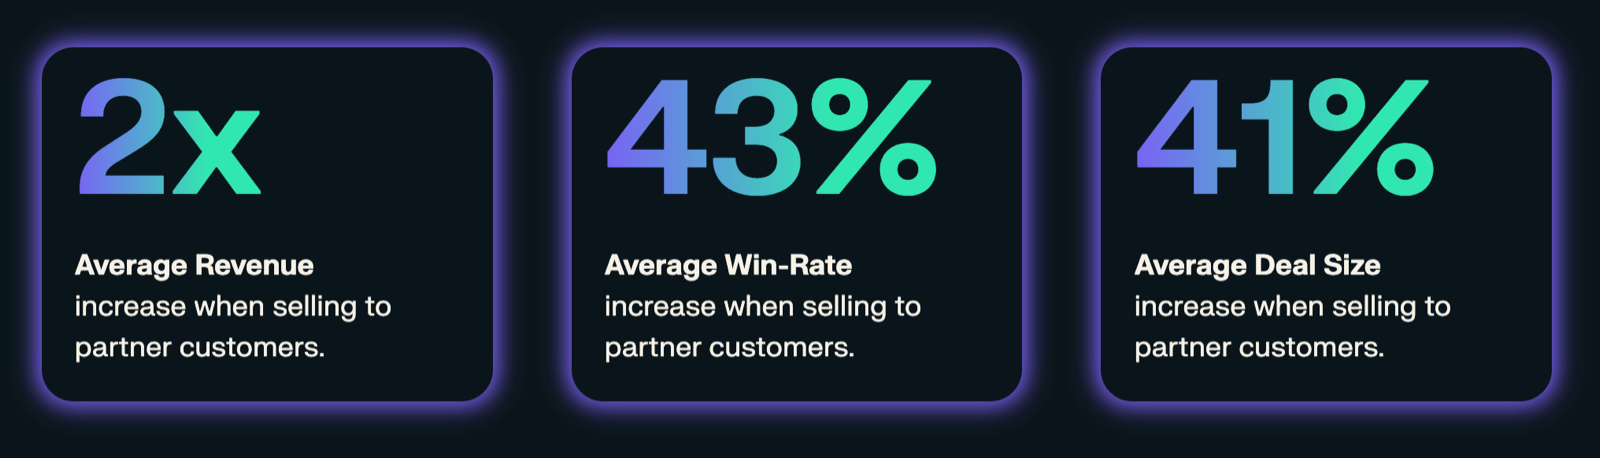 Reveal.co highlights measurable customer outcomes on its website.